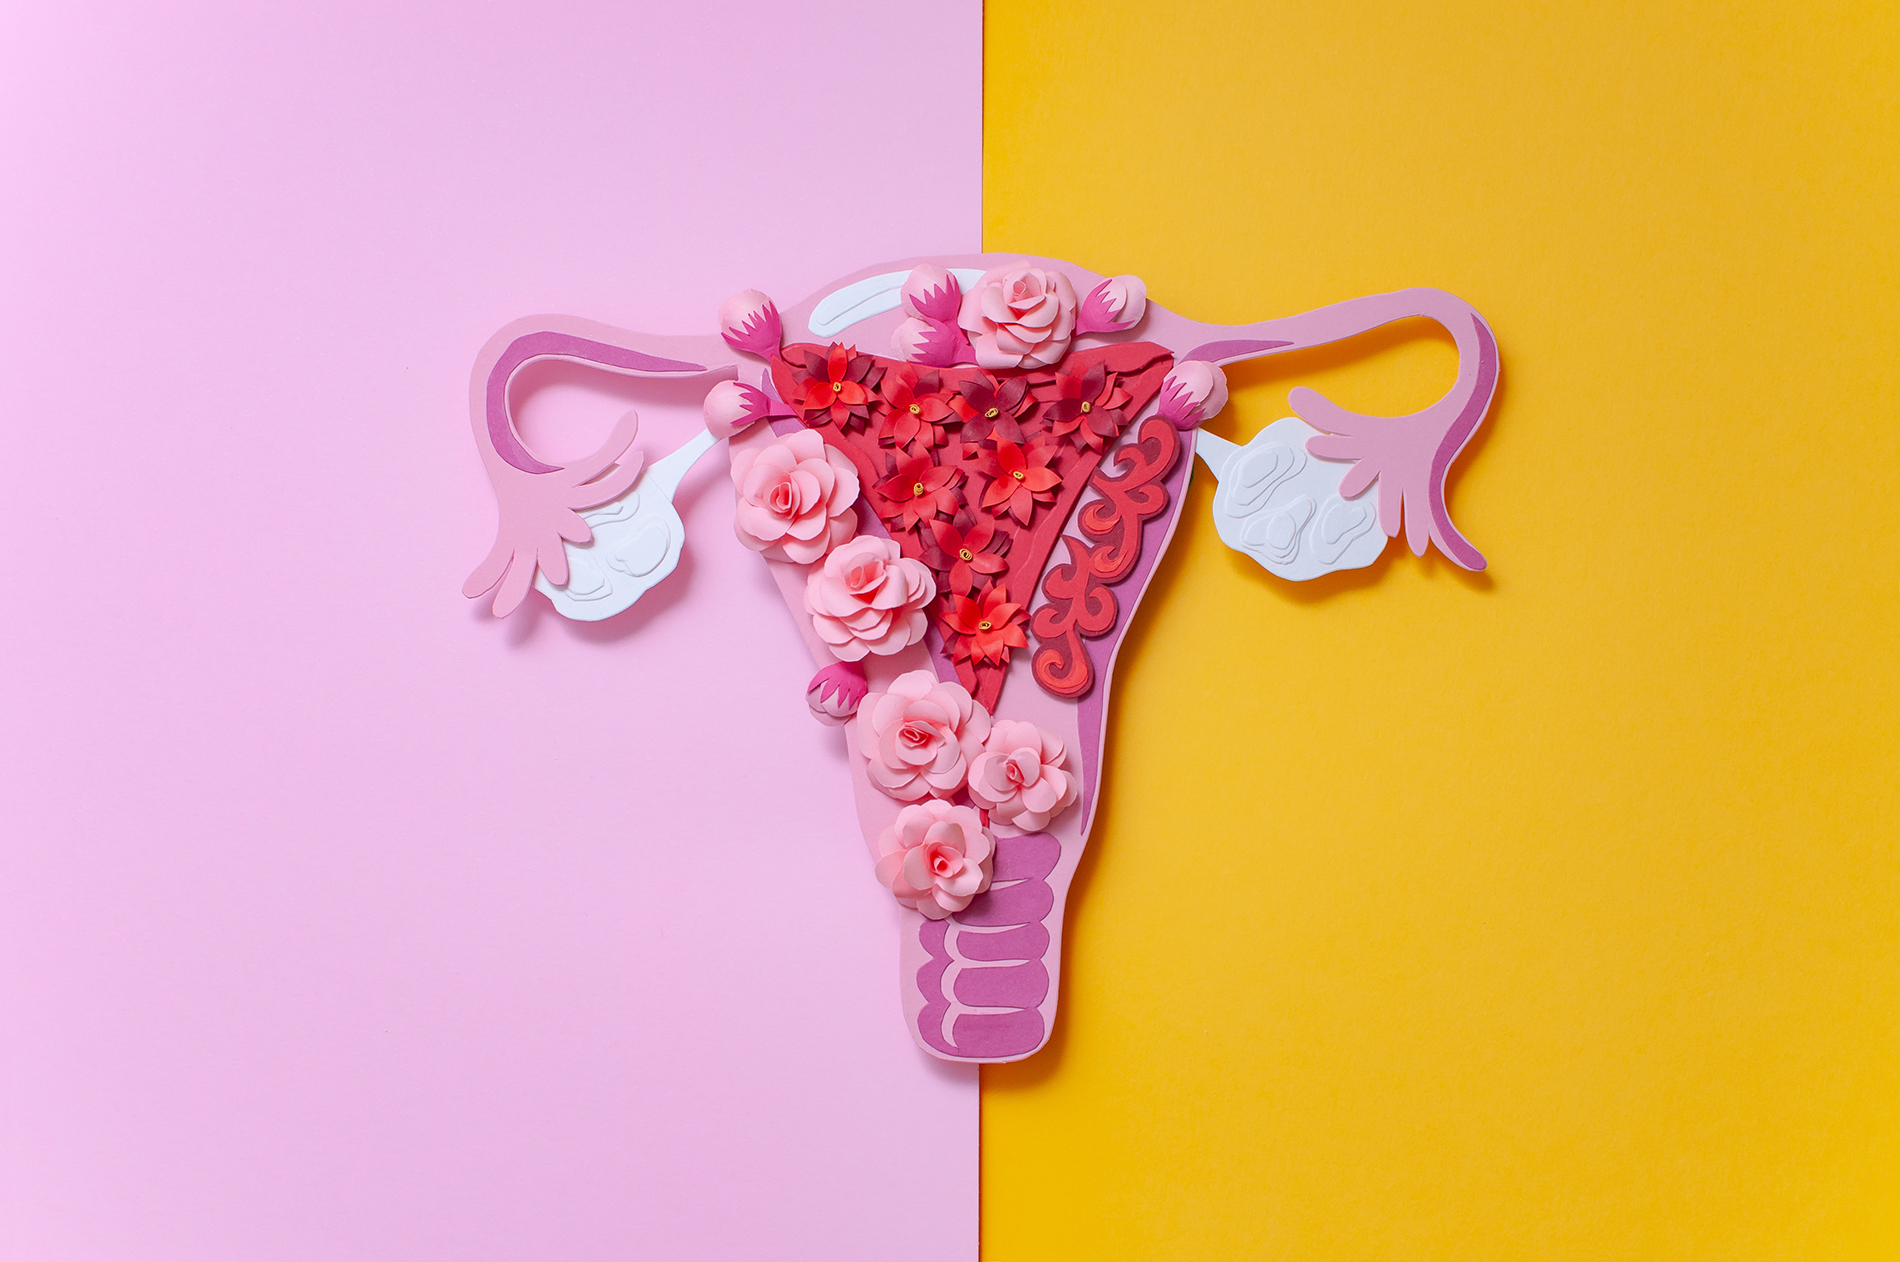 Abstract image of uterus, fallopian tubes and ovaries formed by flowers